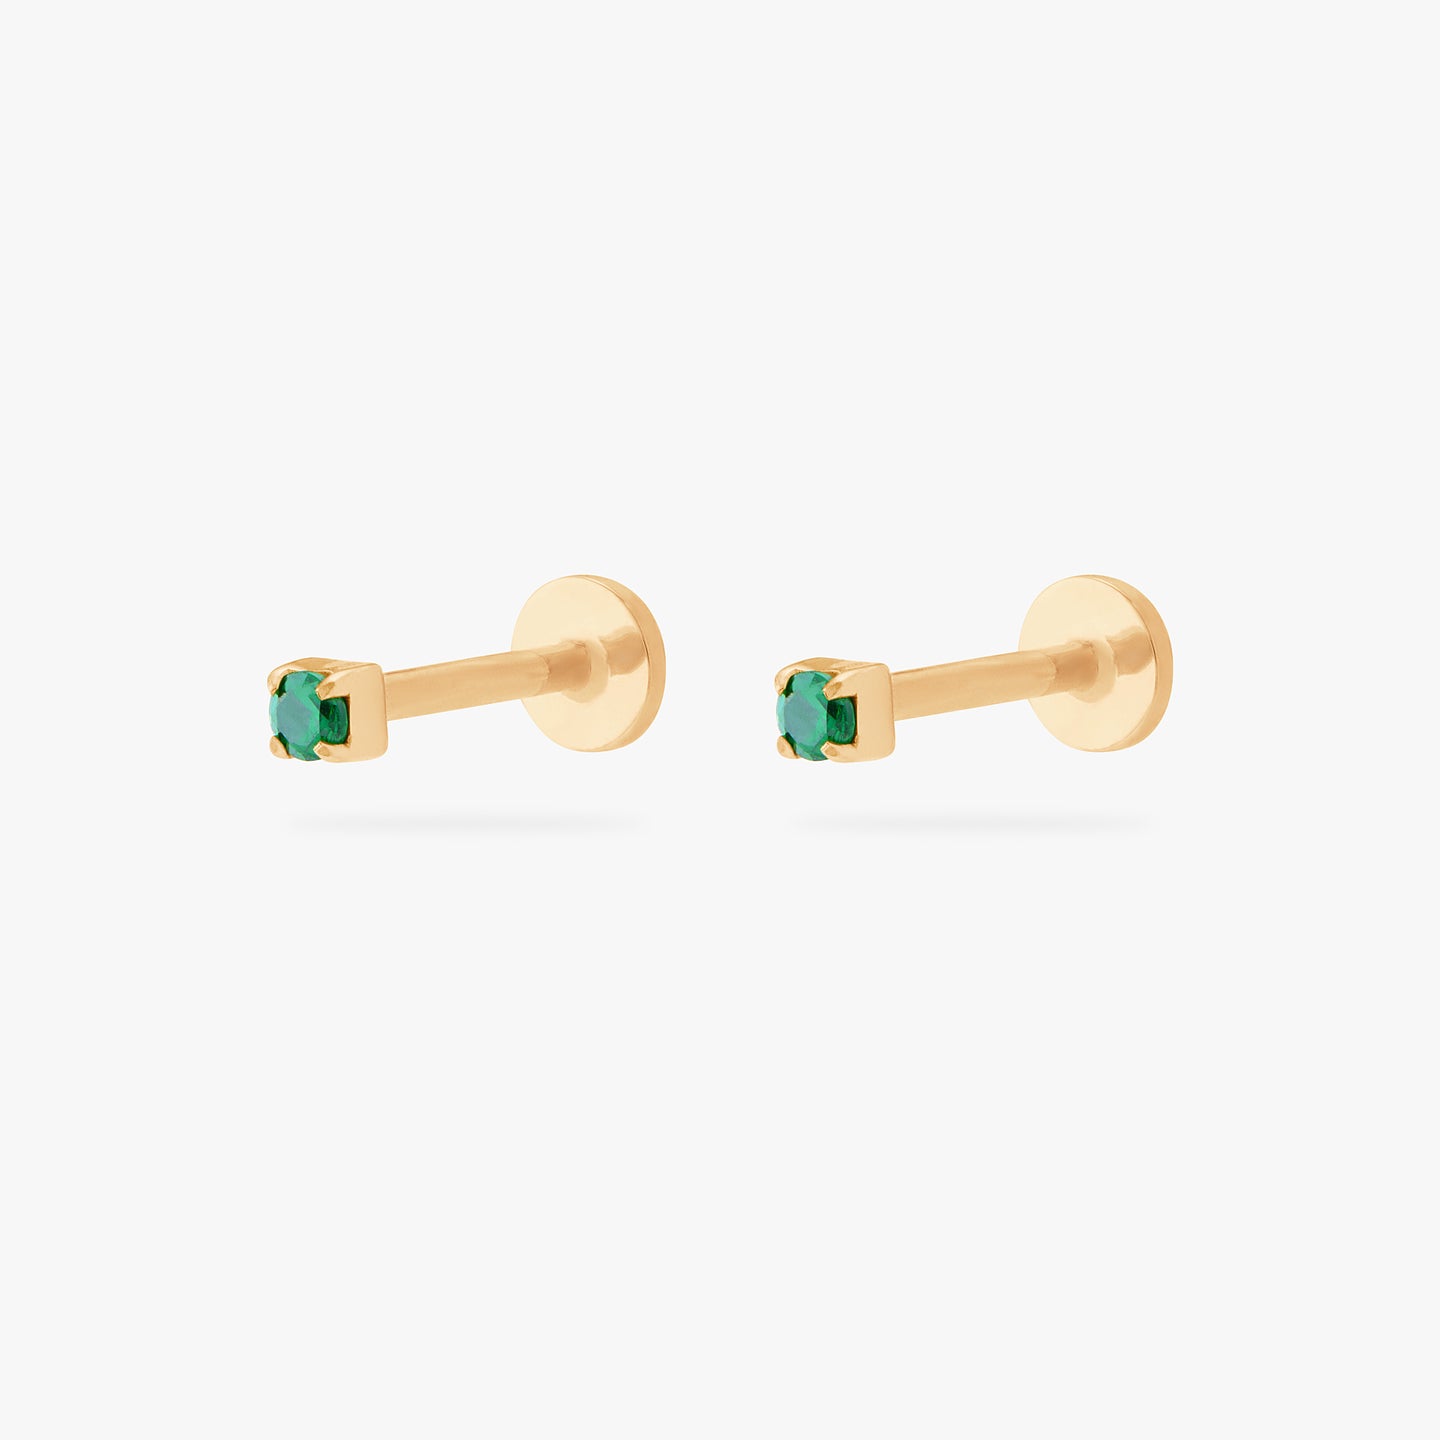 This is an image of a pair of gold/green mini CZ flatback tops, with gold circle dics that are engraved with the 